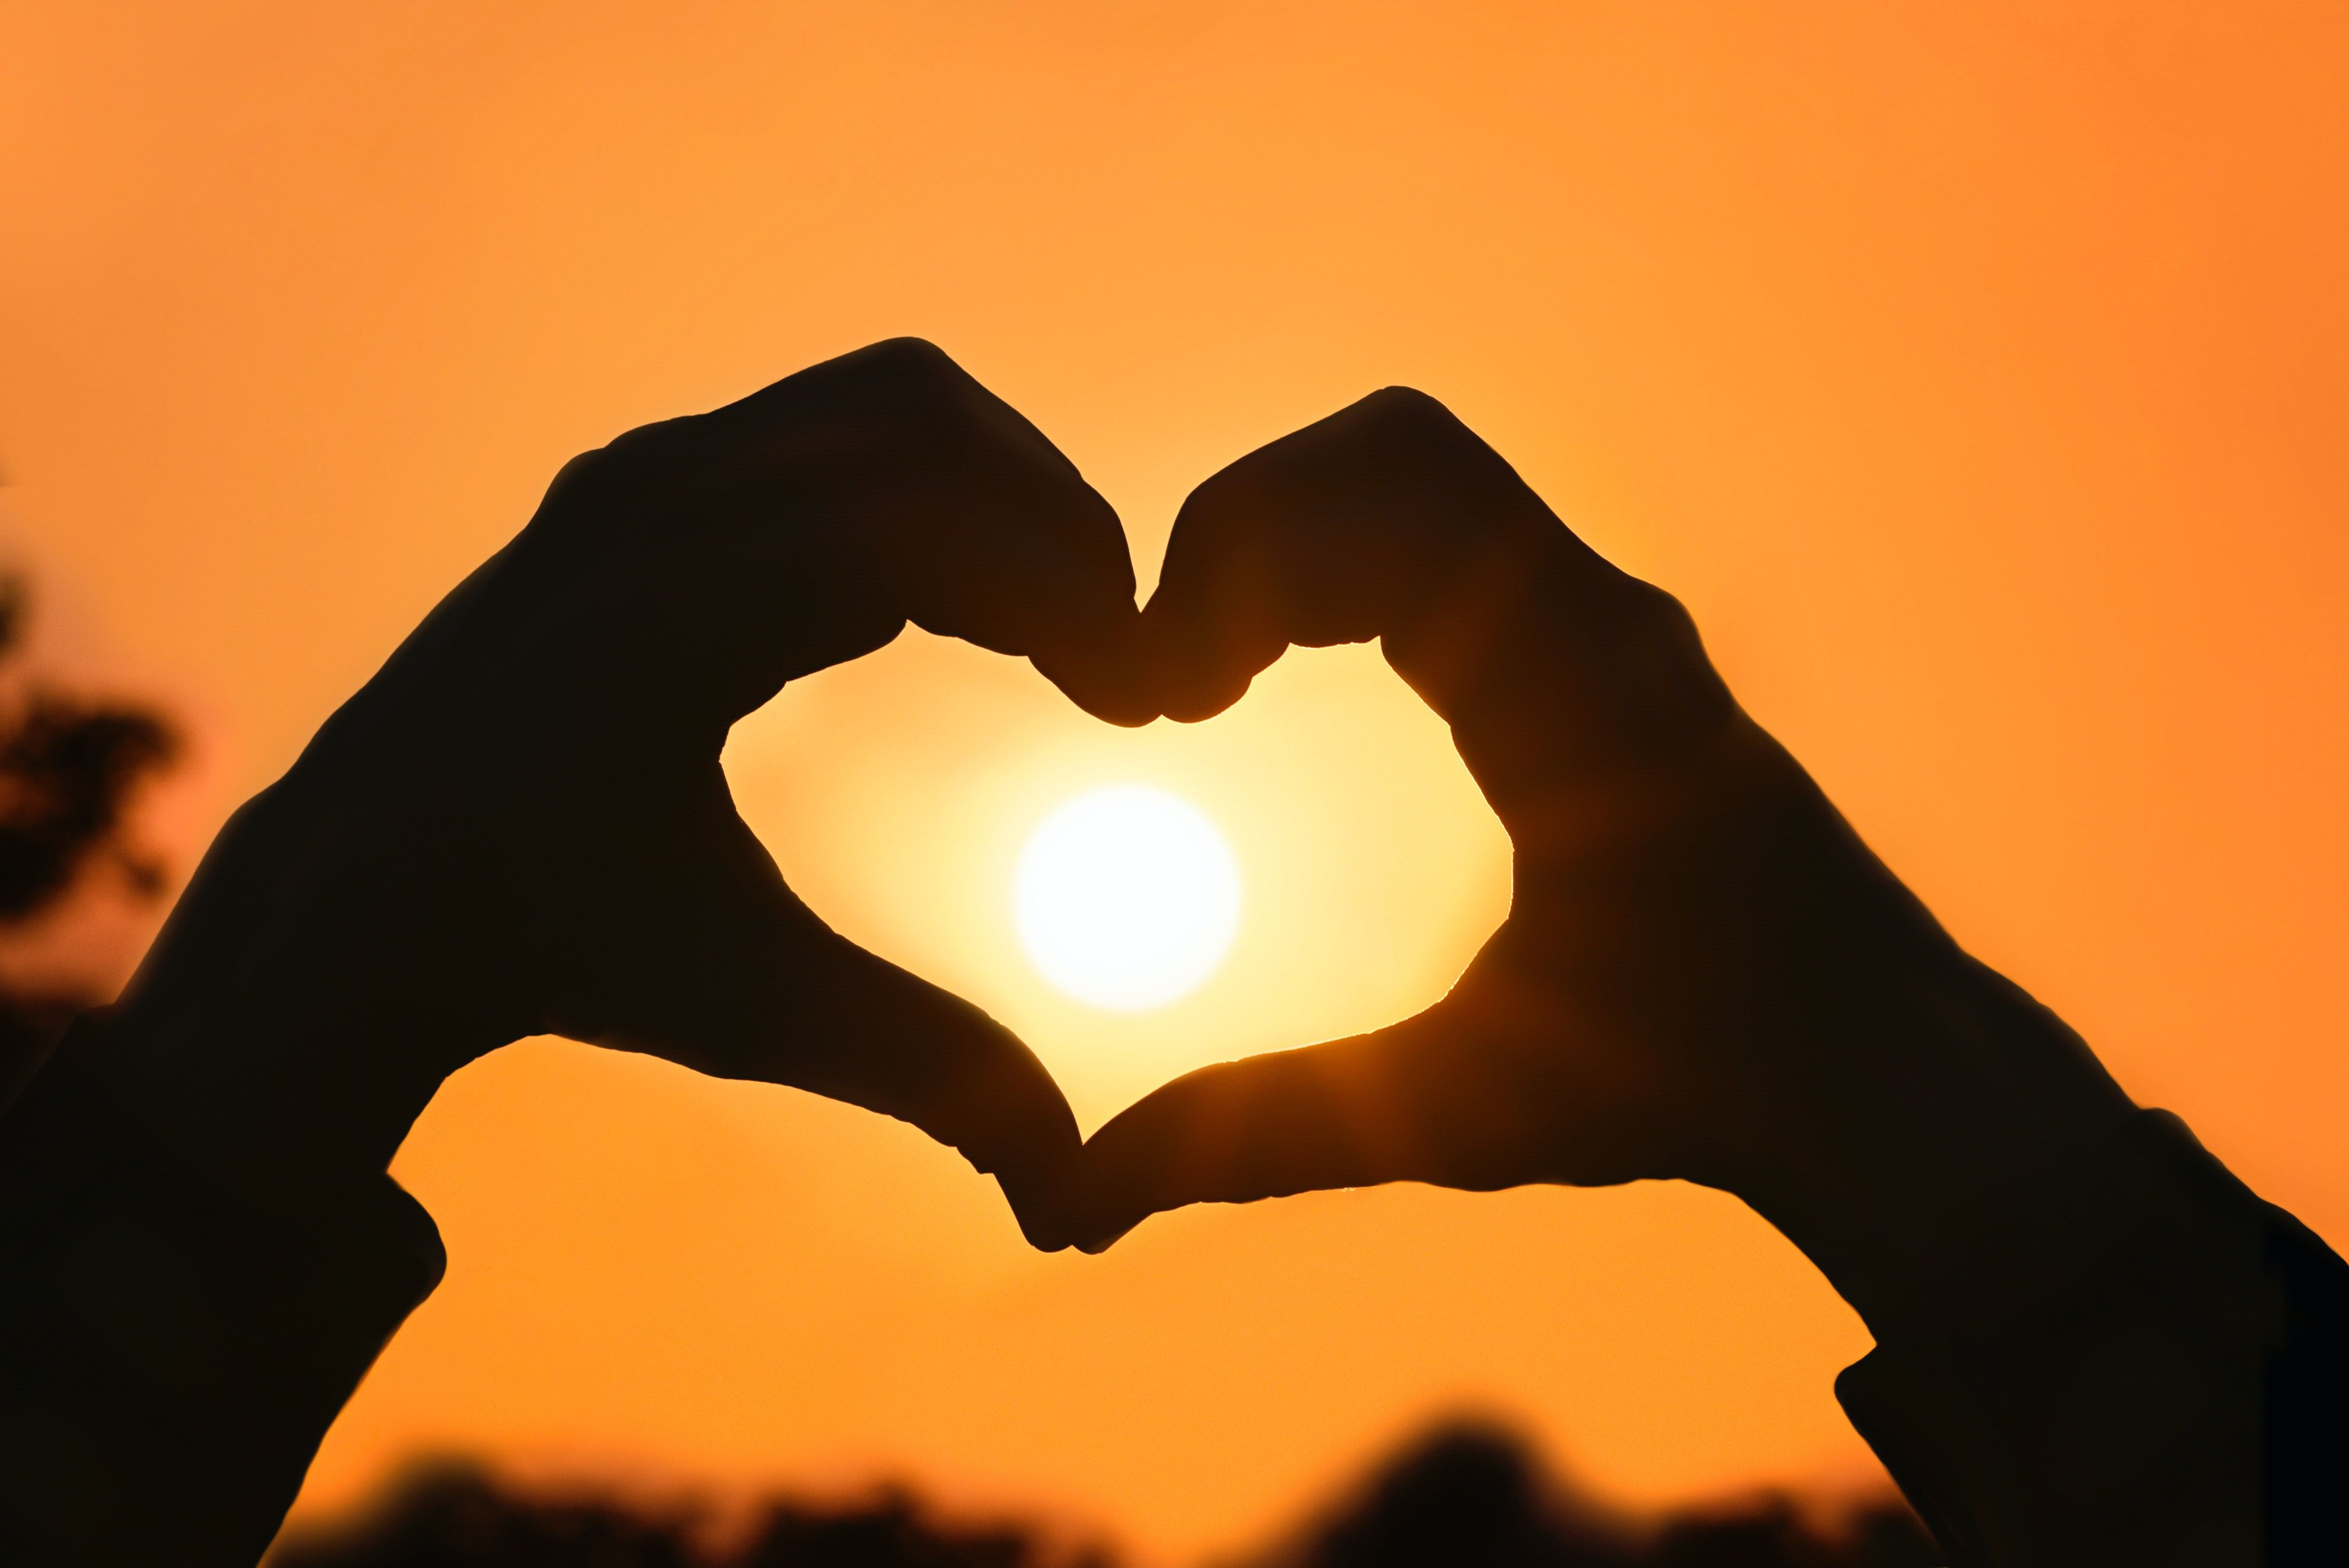 Sunset 4K Wallpaper, Silhouette, Heart shape, Hands together, Valentine&;s Day, Love